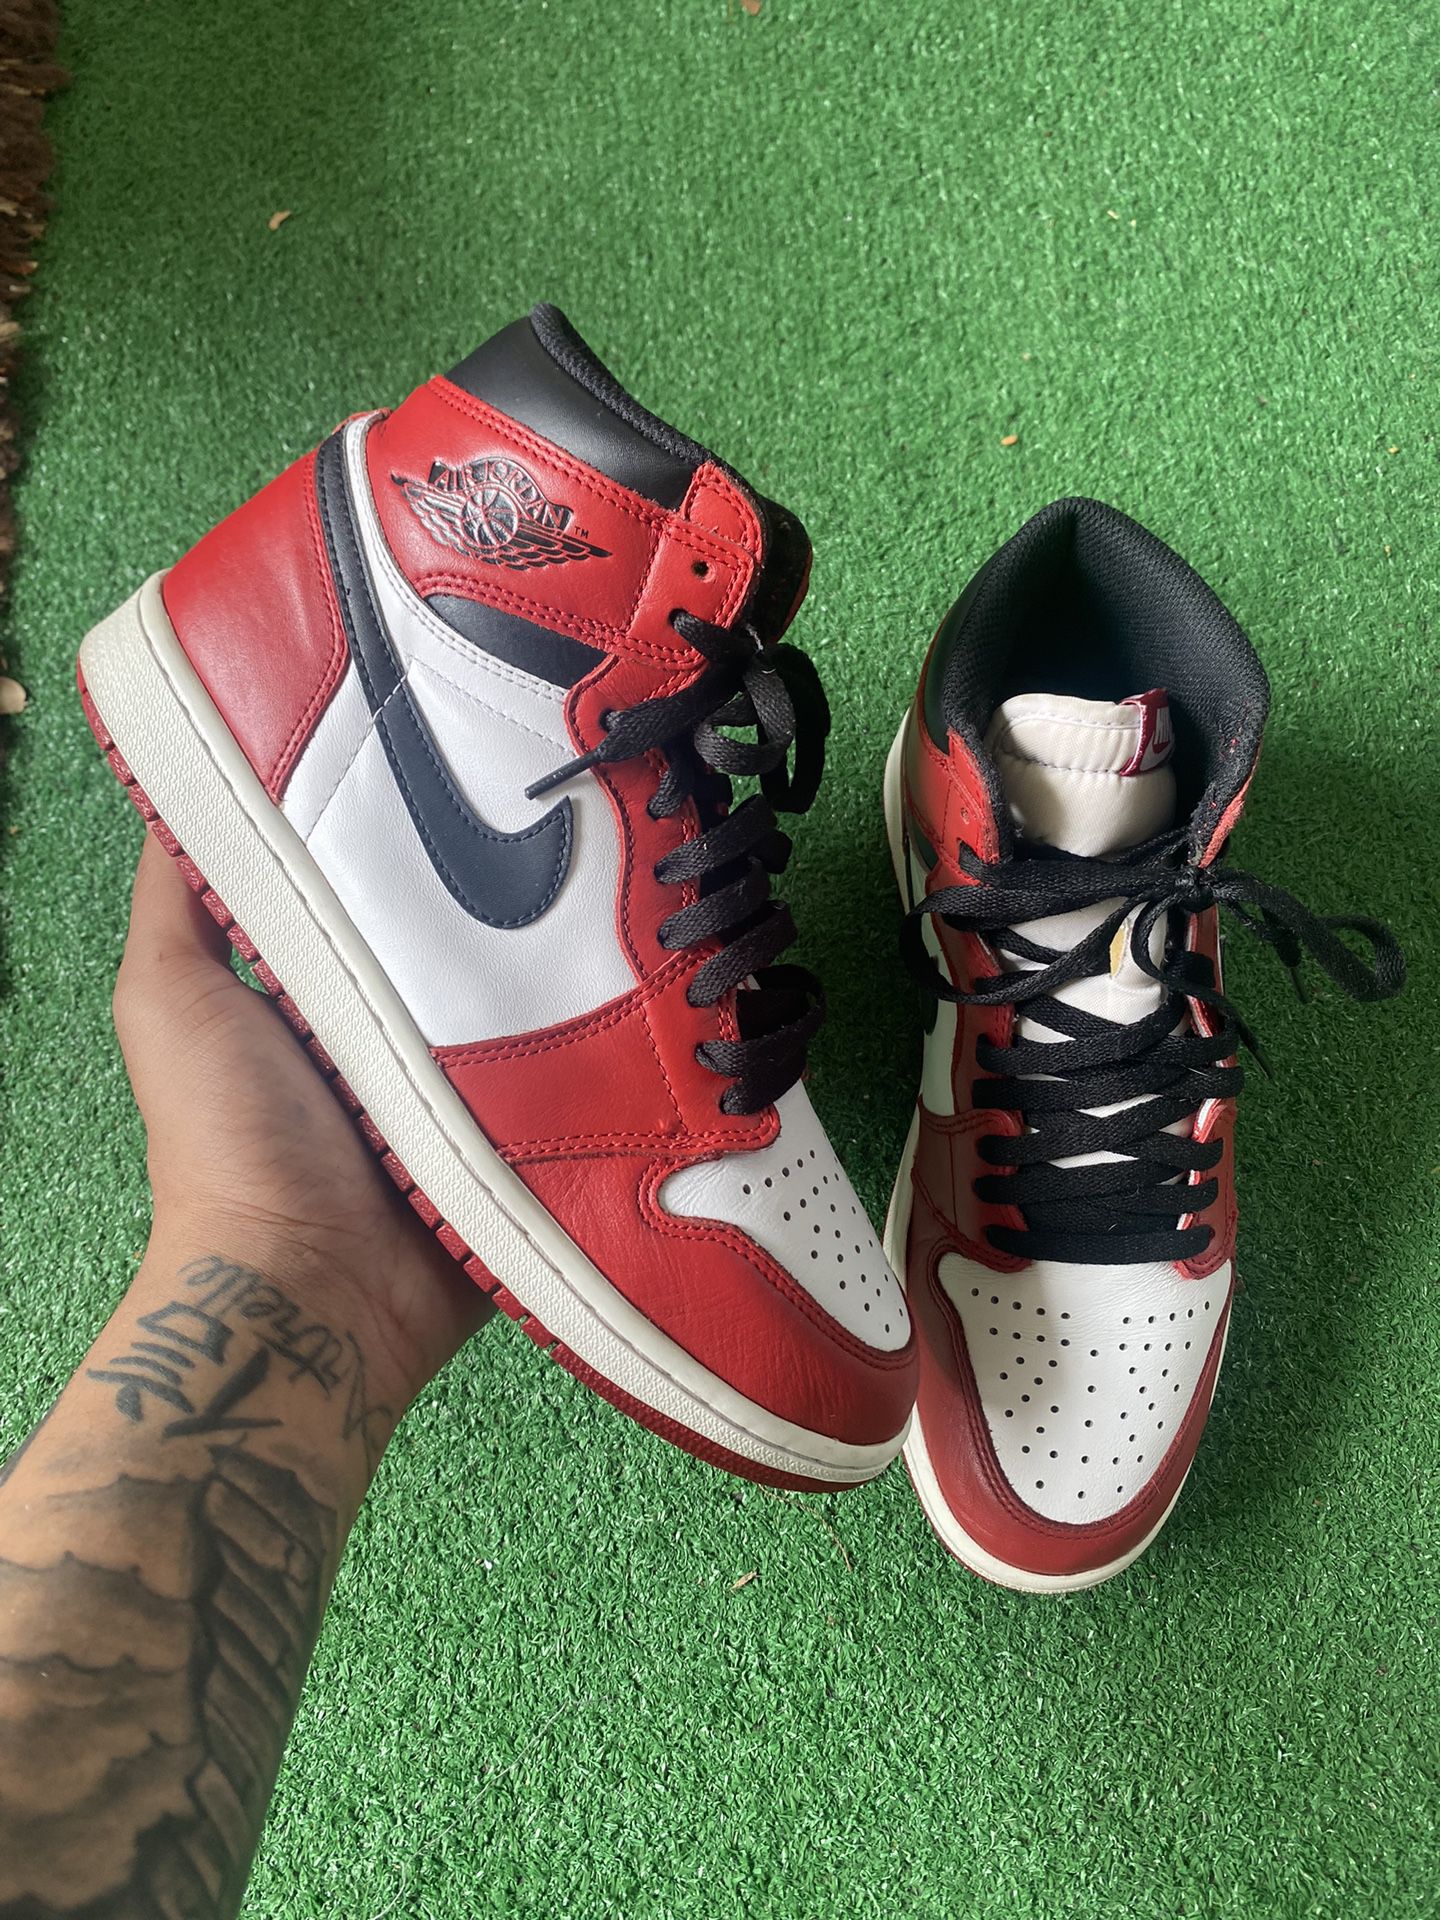 2015 Chicago 1s Size 9